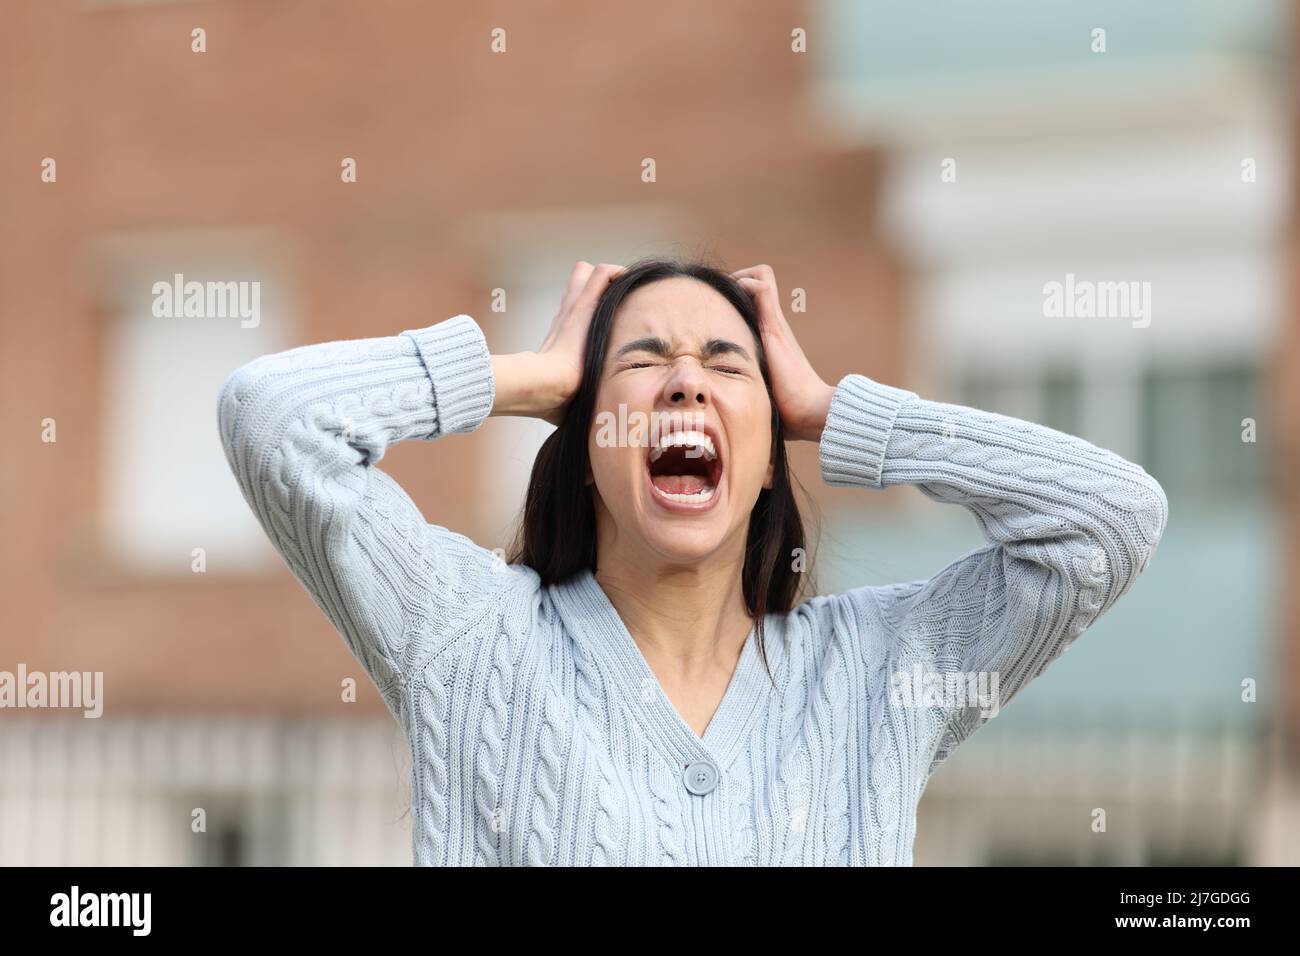 Front view portrait of a mad woman yelling in the street Stock Photo